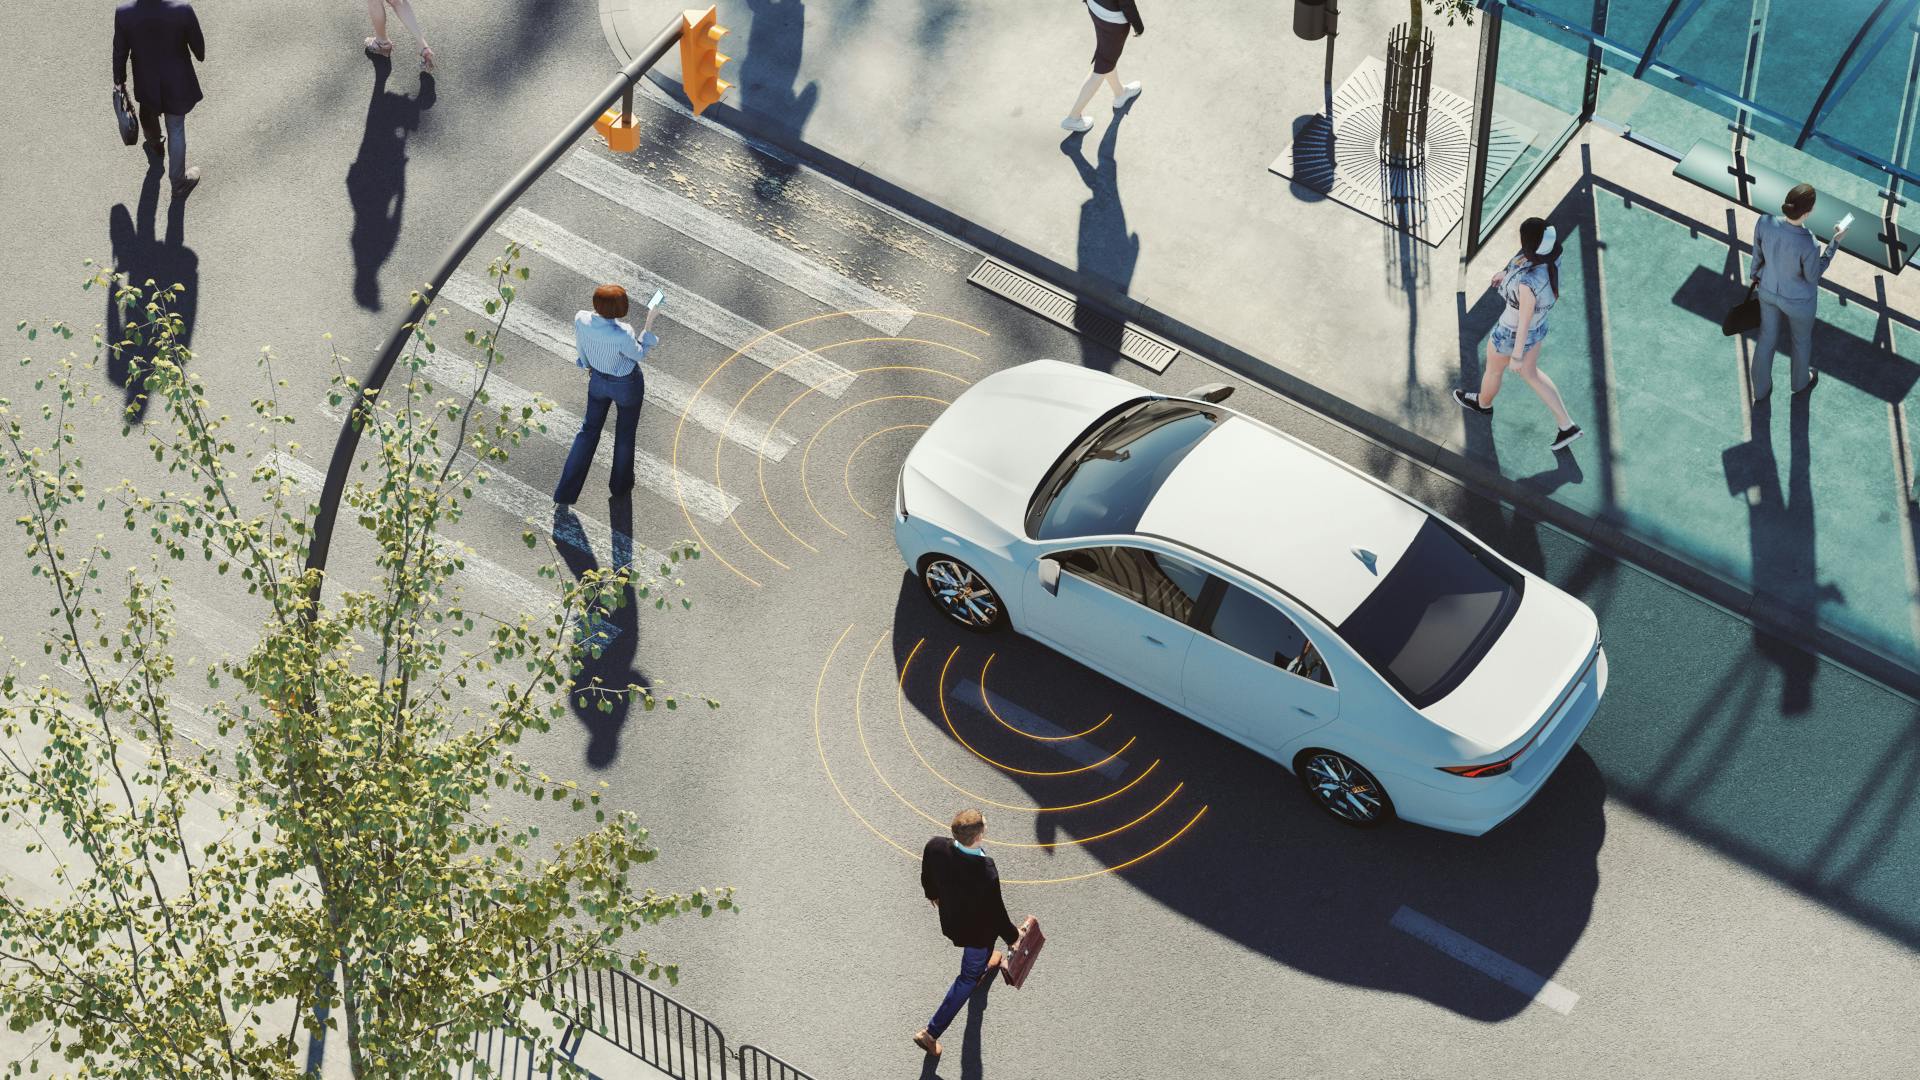 An autonomous vehicle driving on a busy city street using sensors to detect and predict pedestrian traffic